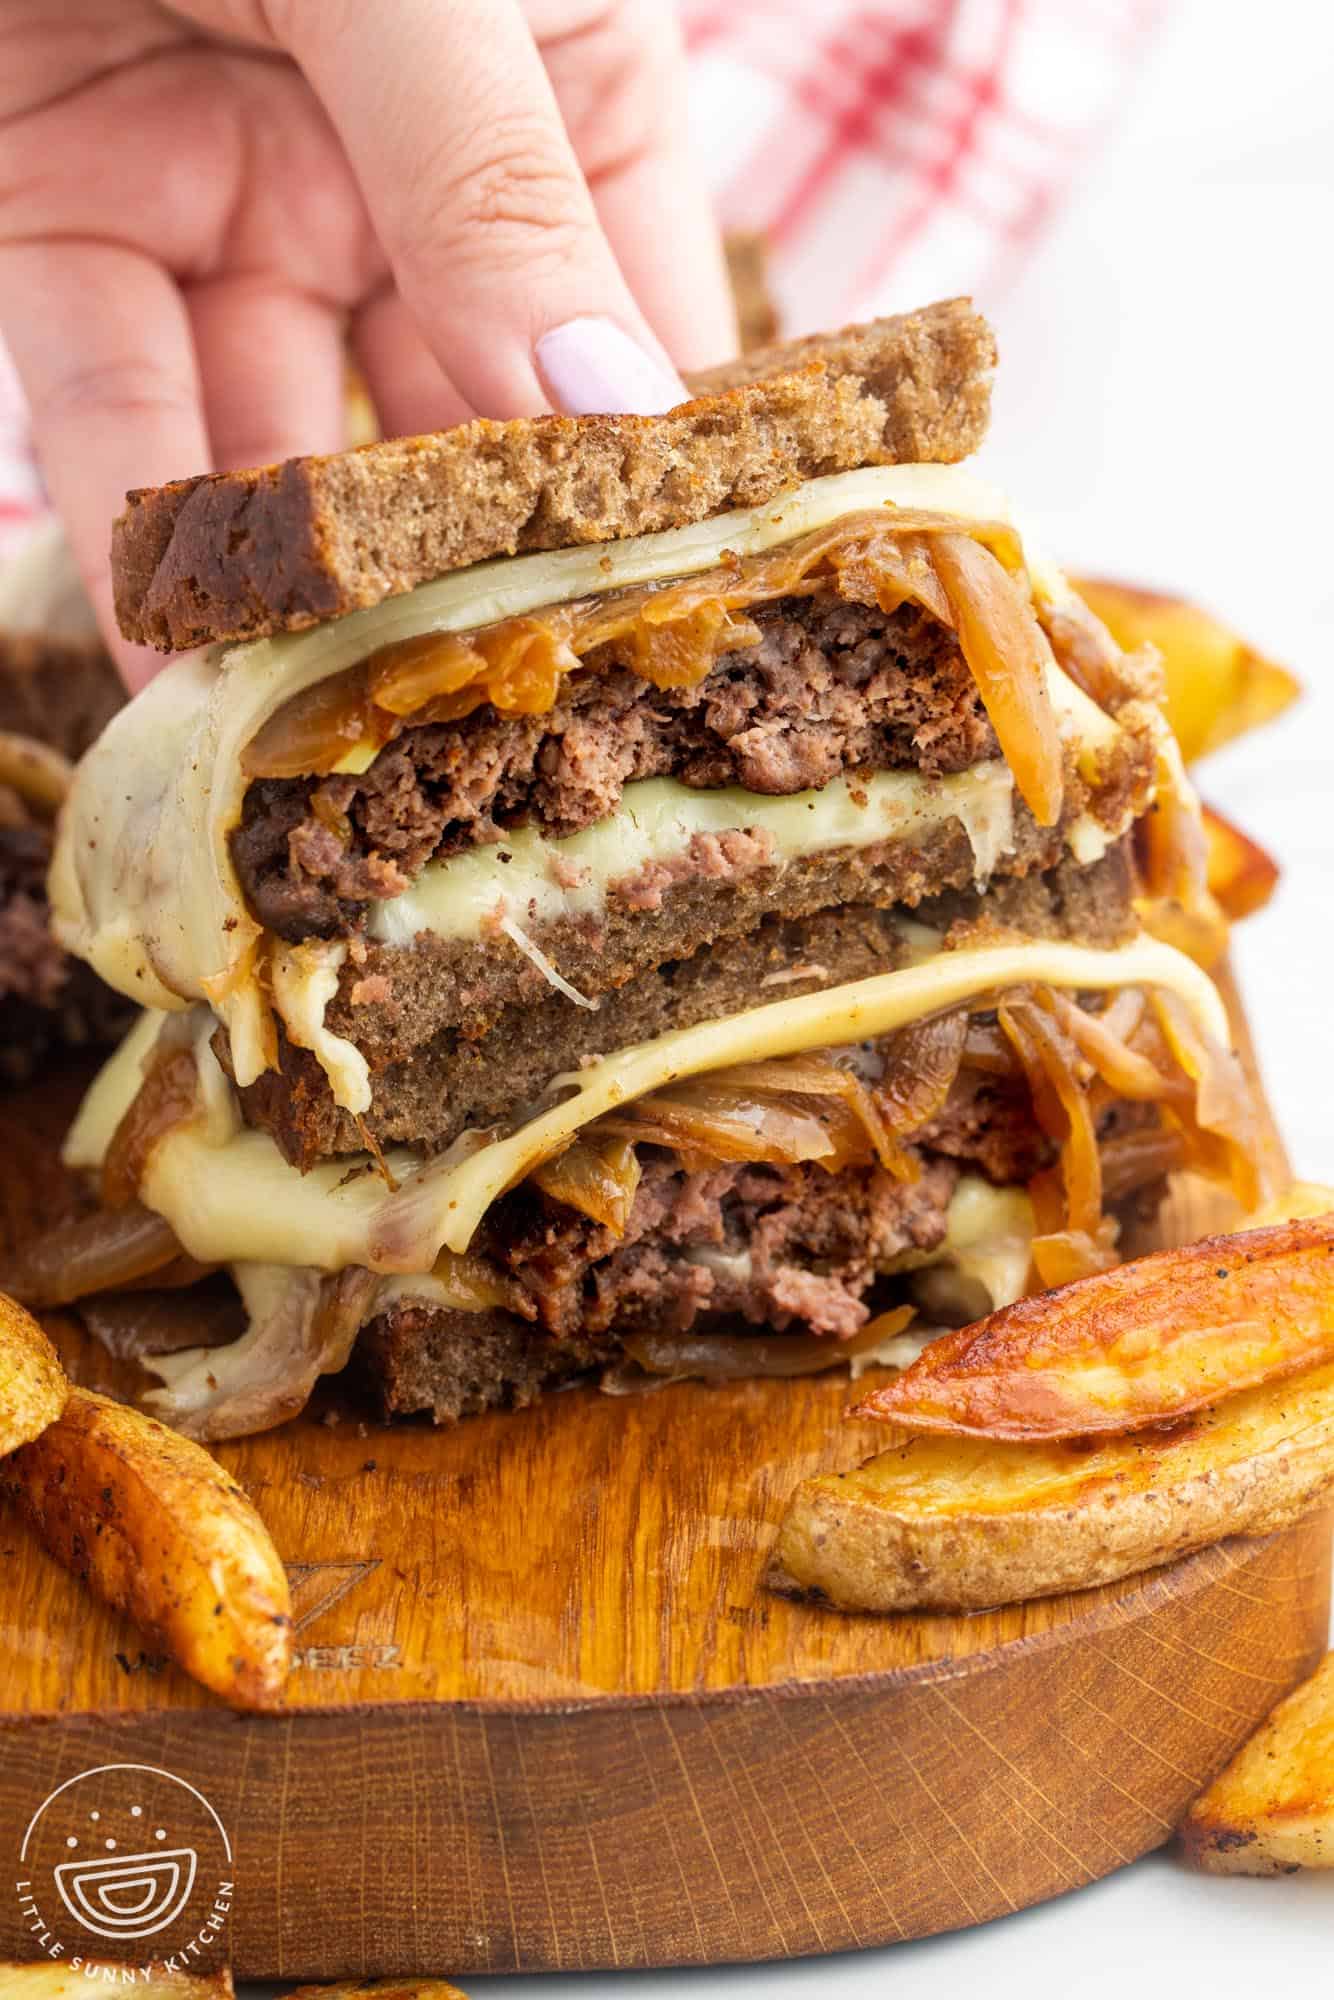 a patty melt, cut in half and stacked to show the inside. french fries are next to it on a wooden board. a  hand is holding the sandwich.